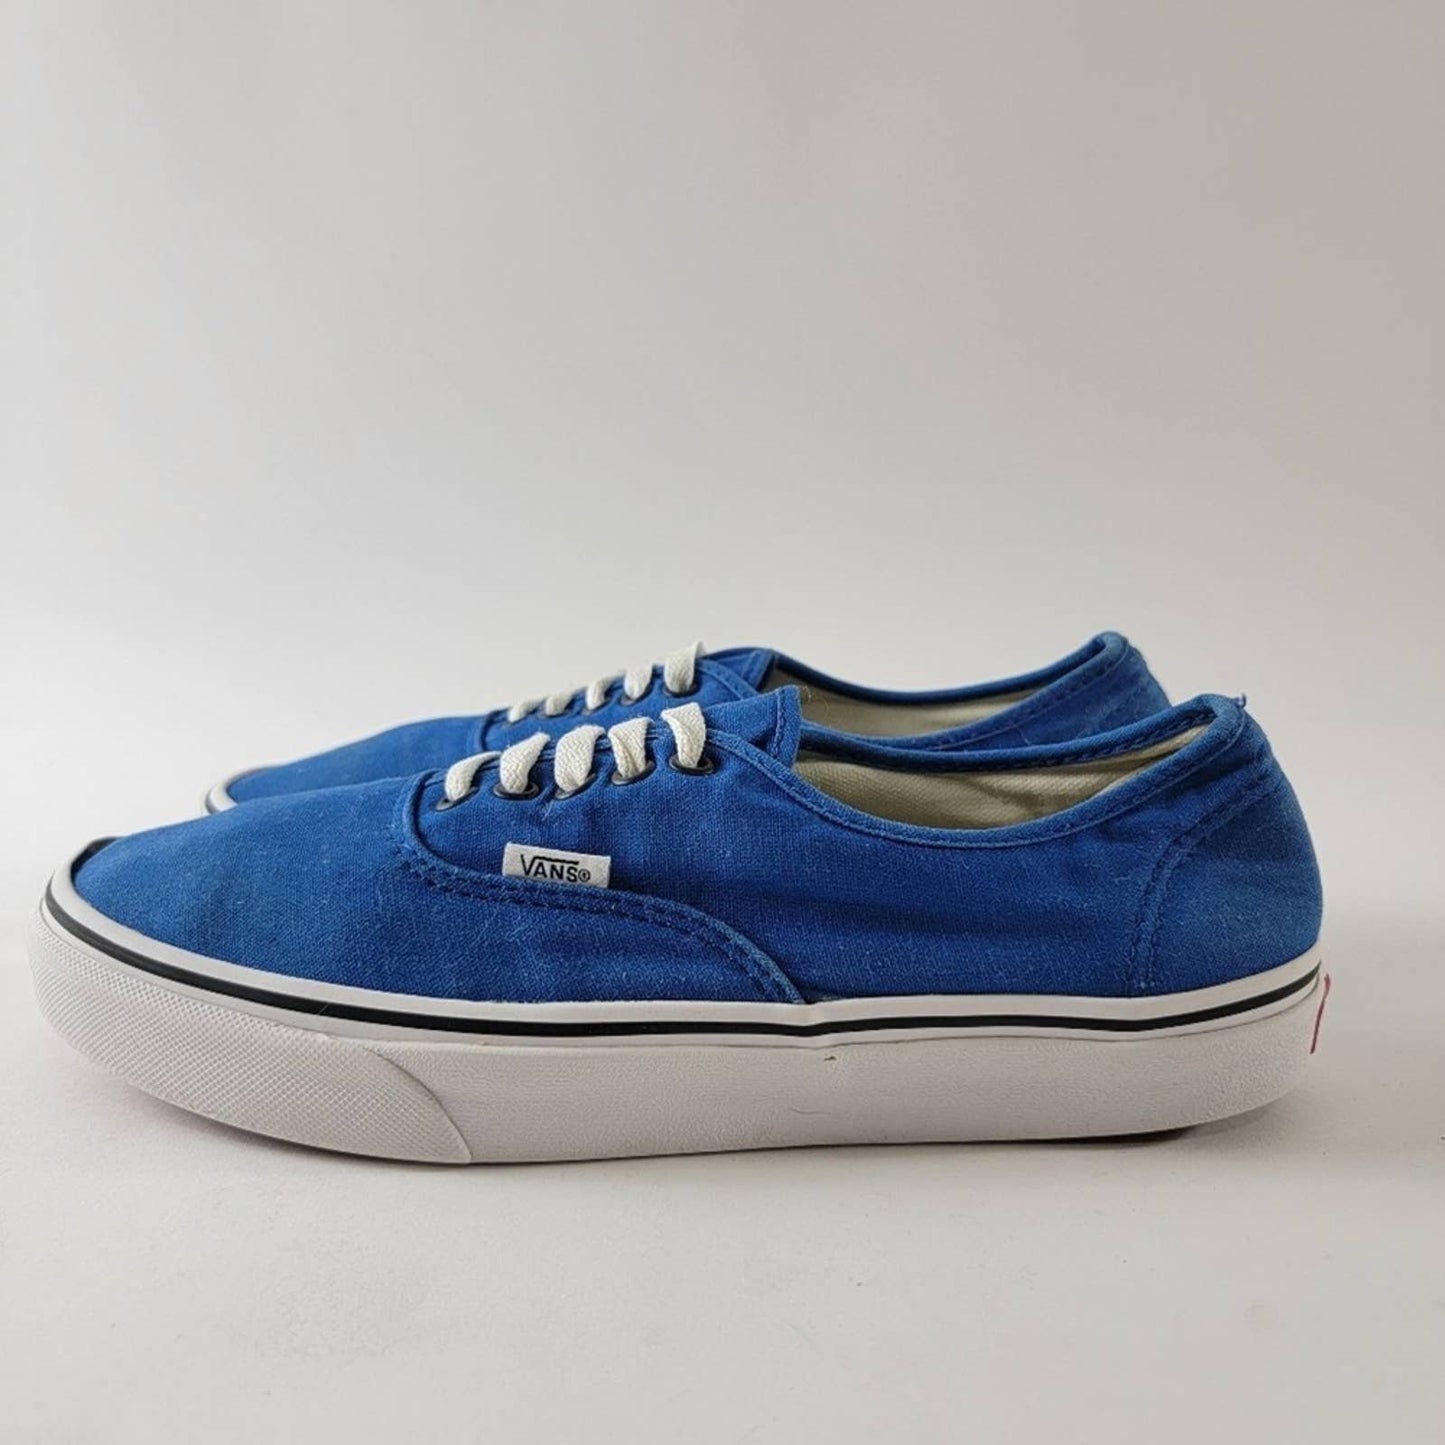 Vans Atwood Classic Lace Up Low Top Sneakers - 9.5 / 11